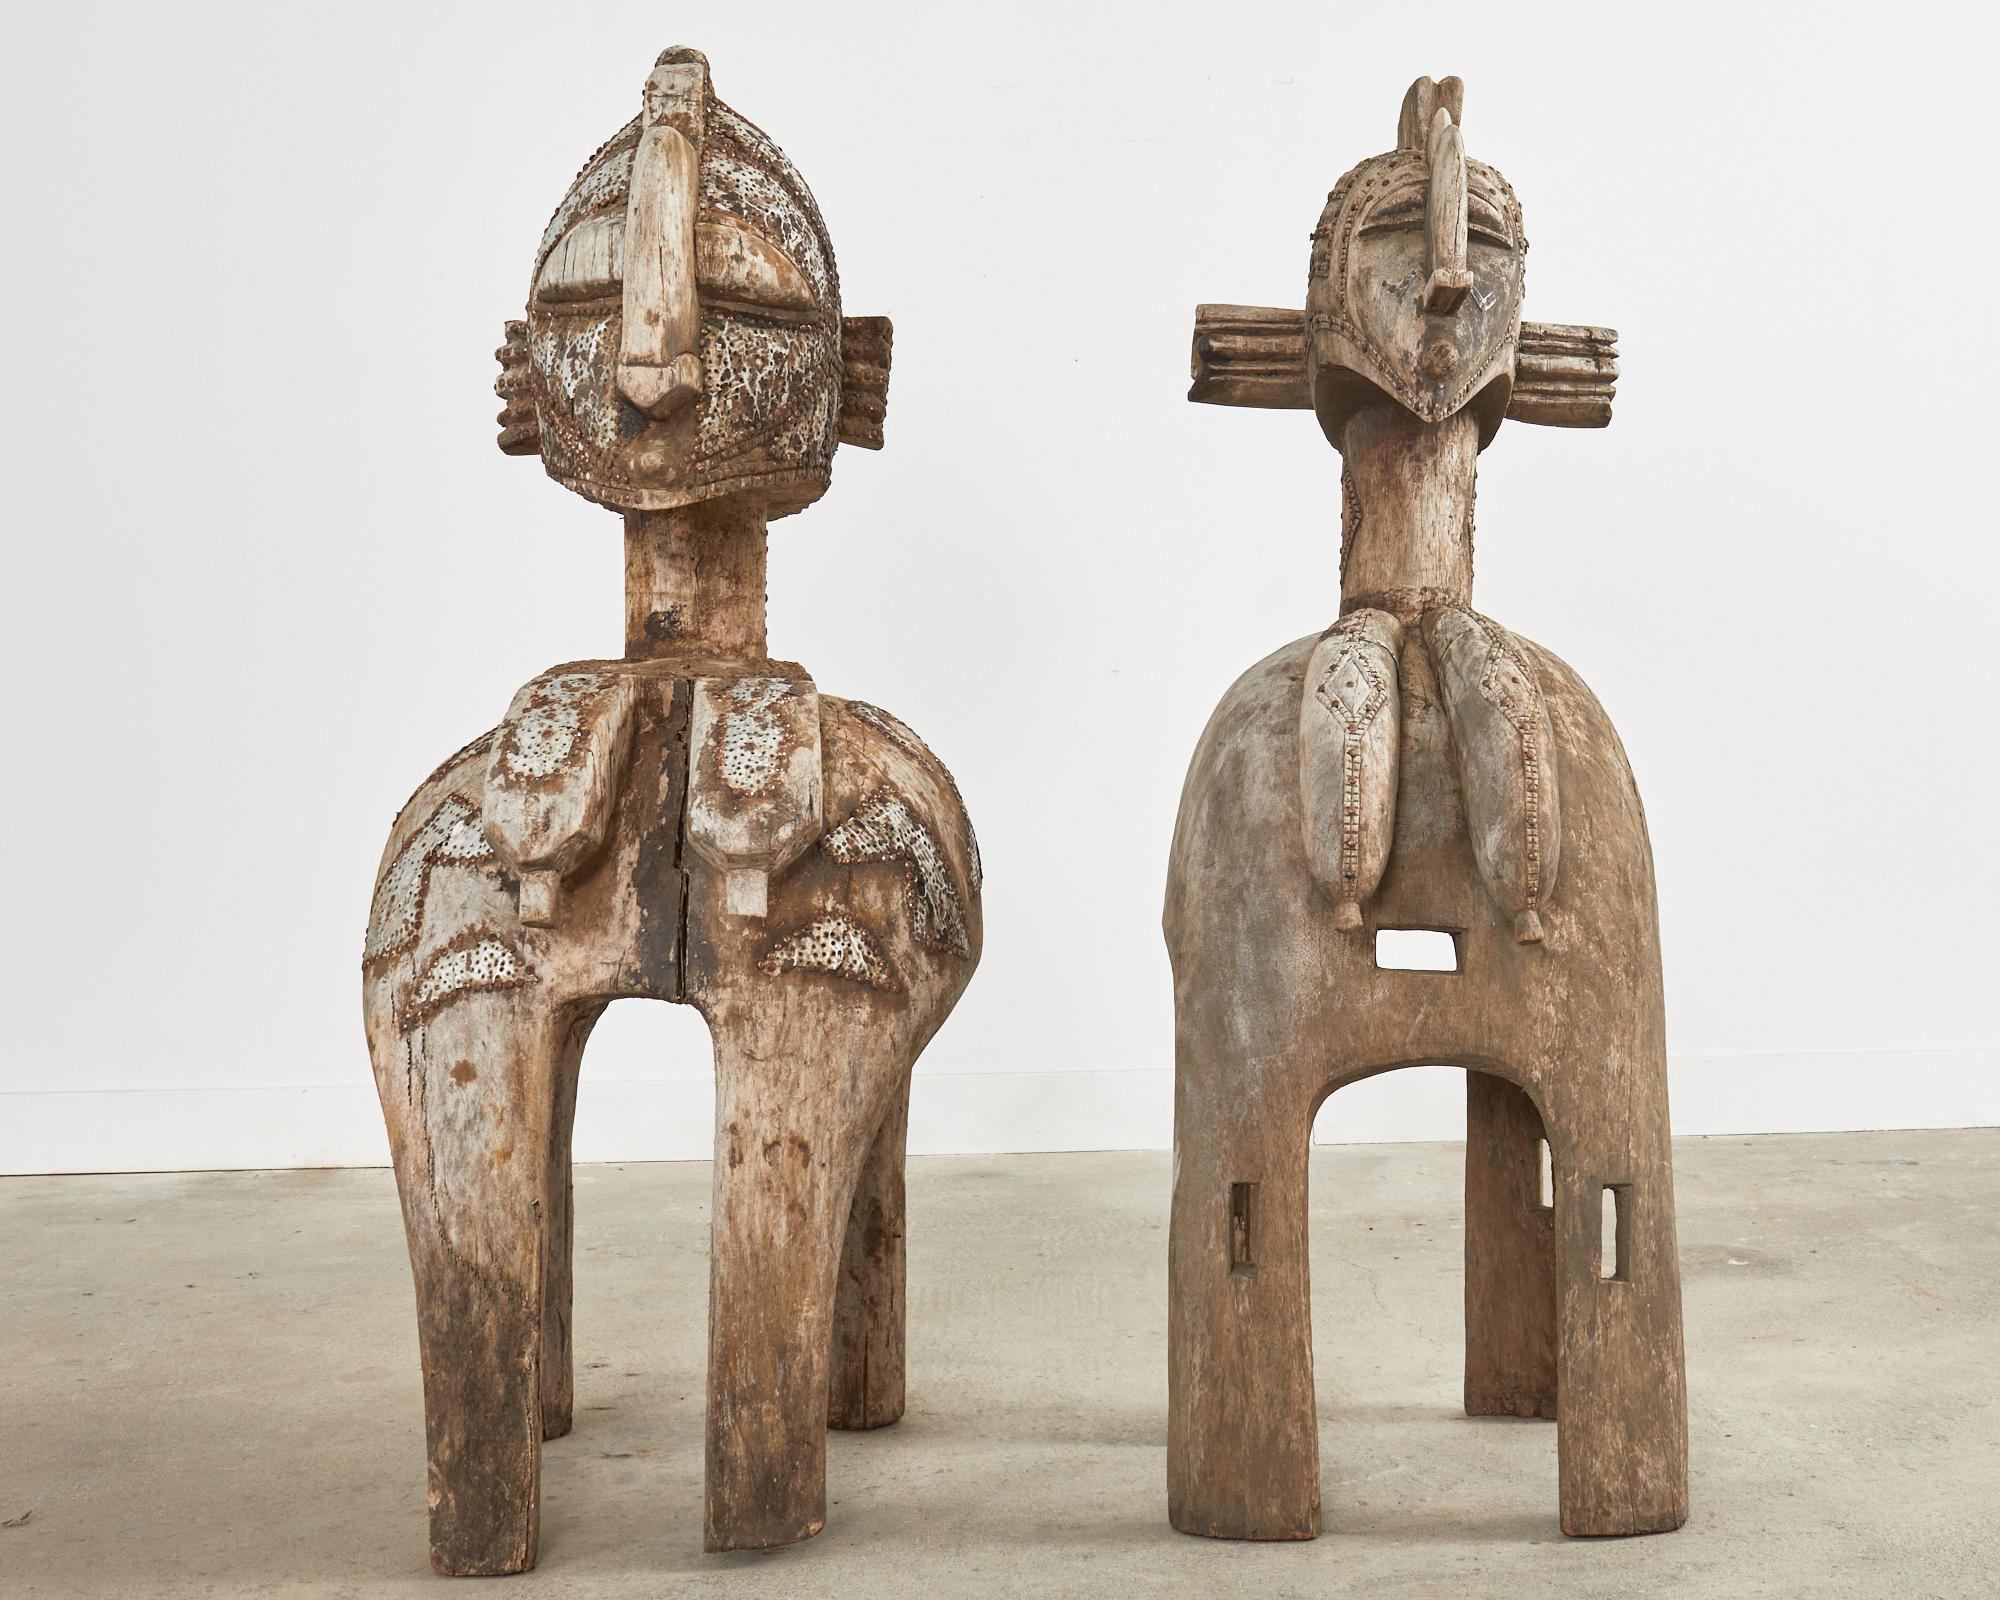 Amazing pair of imposing West African Baga Nimba fertility shoulder mask sculptures or statues carved from teak. The headdresses depict busts of women on four legs stands decorated with traditional carved designs by the Baga people who inhabit the